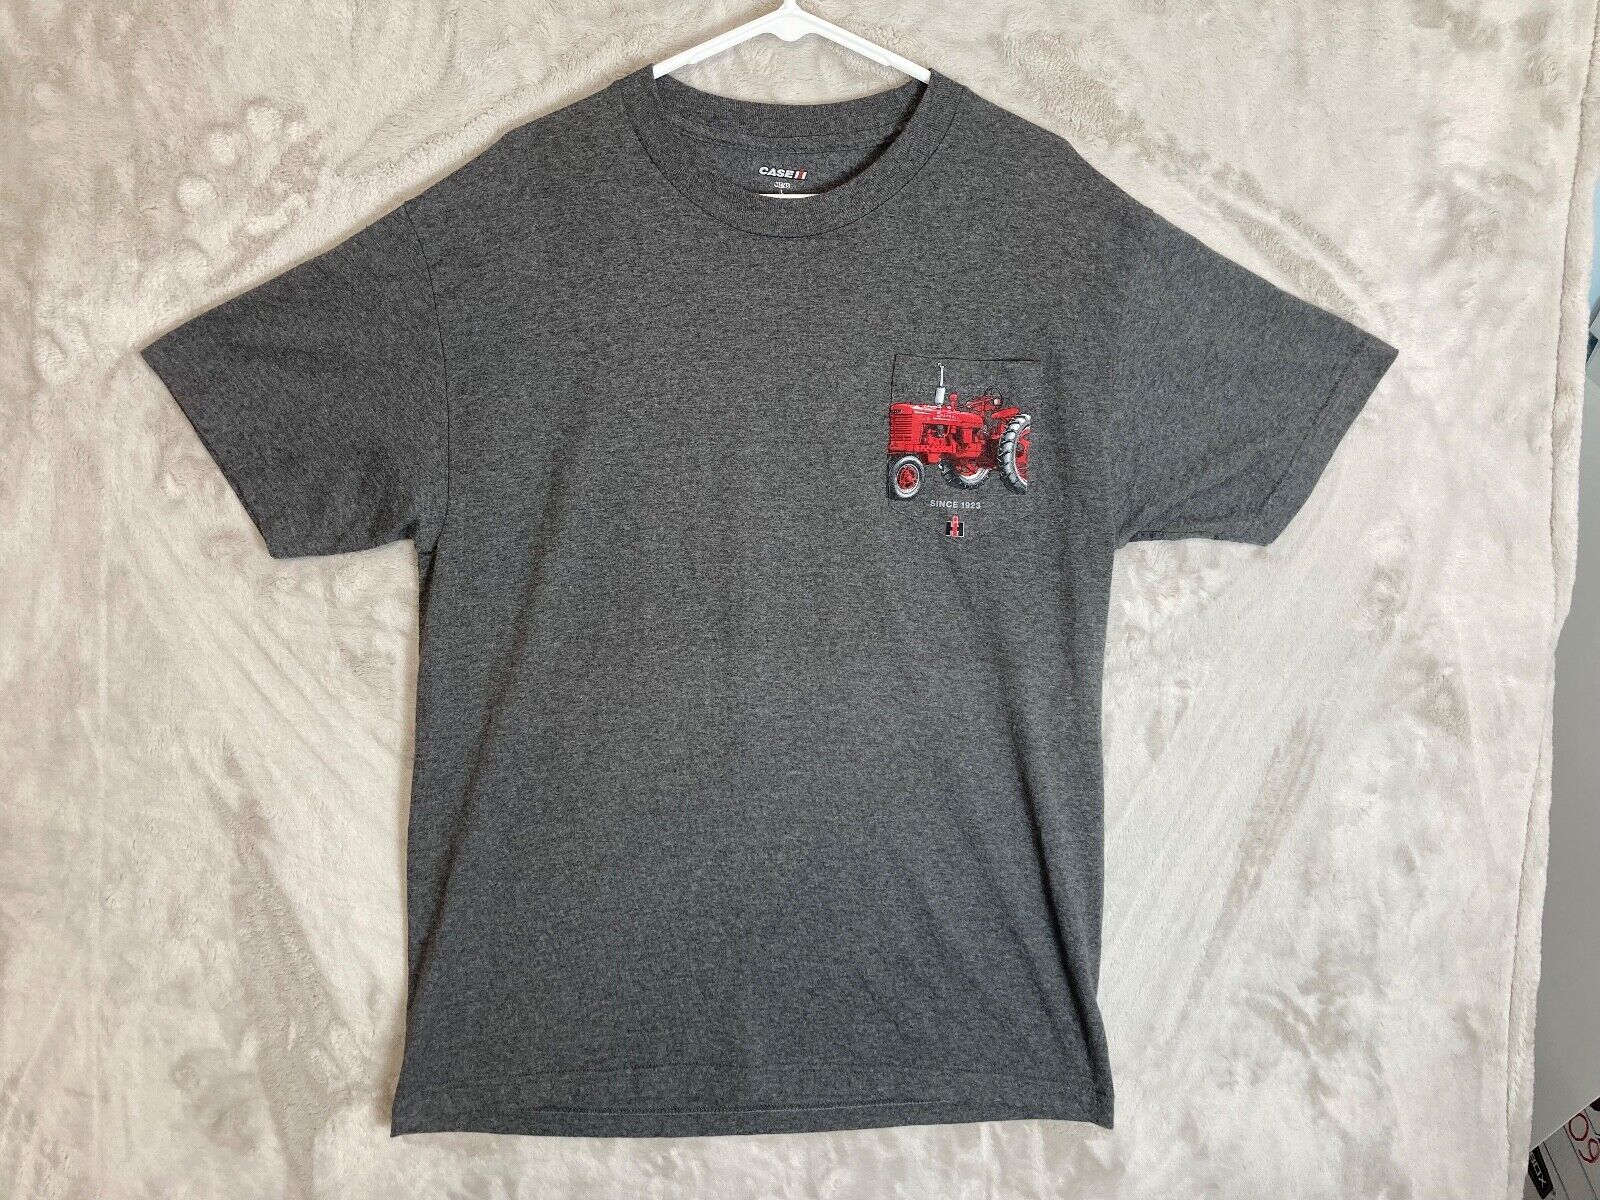 Case IH Farmall T-Shirt W/ Tractor & Since 1923 on Front Pocket Gray- Mens Lg